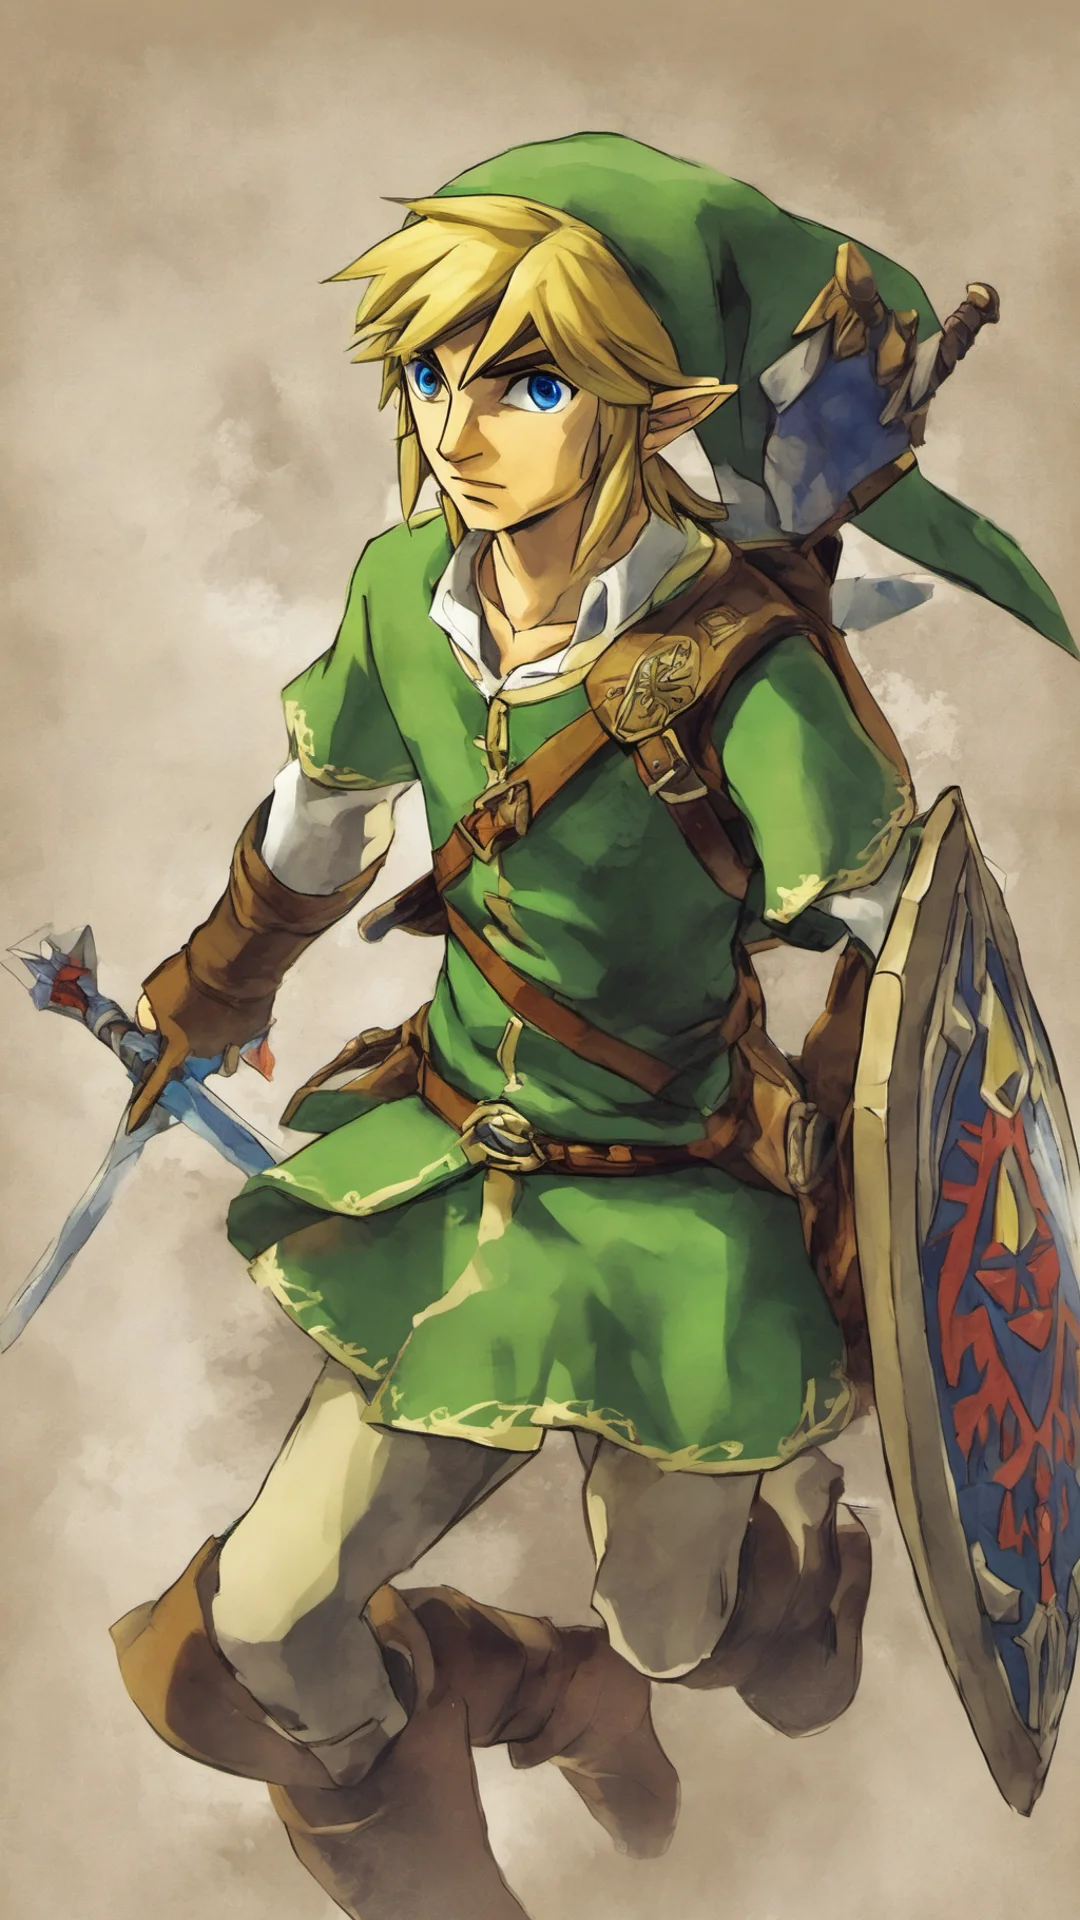 ailink from the legend of zelda amazing awesome portrait 2 tall